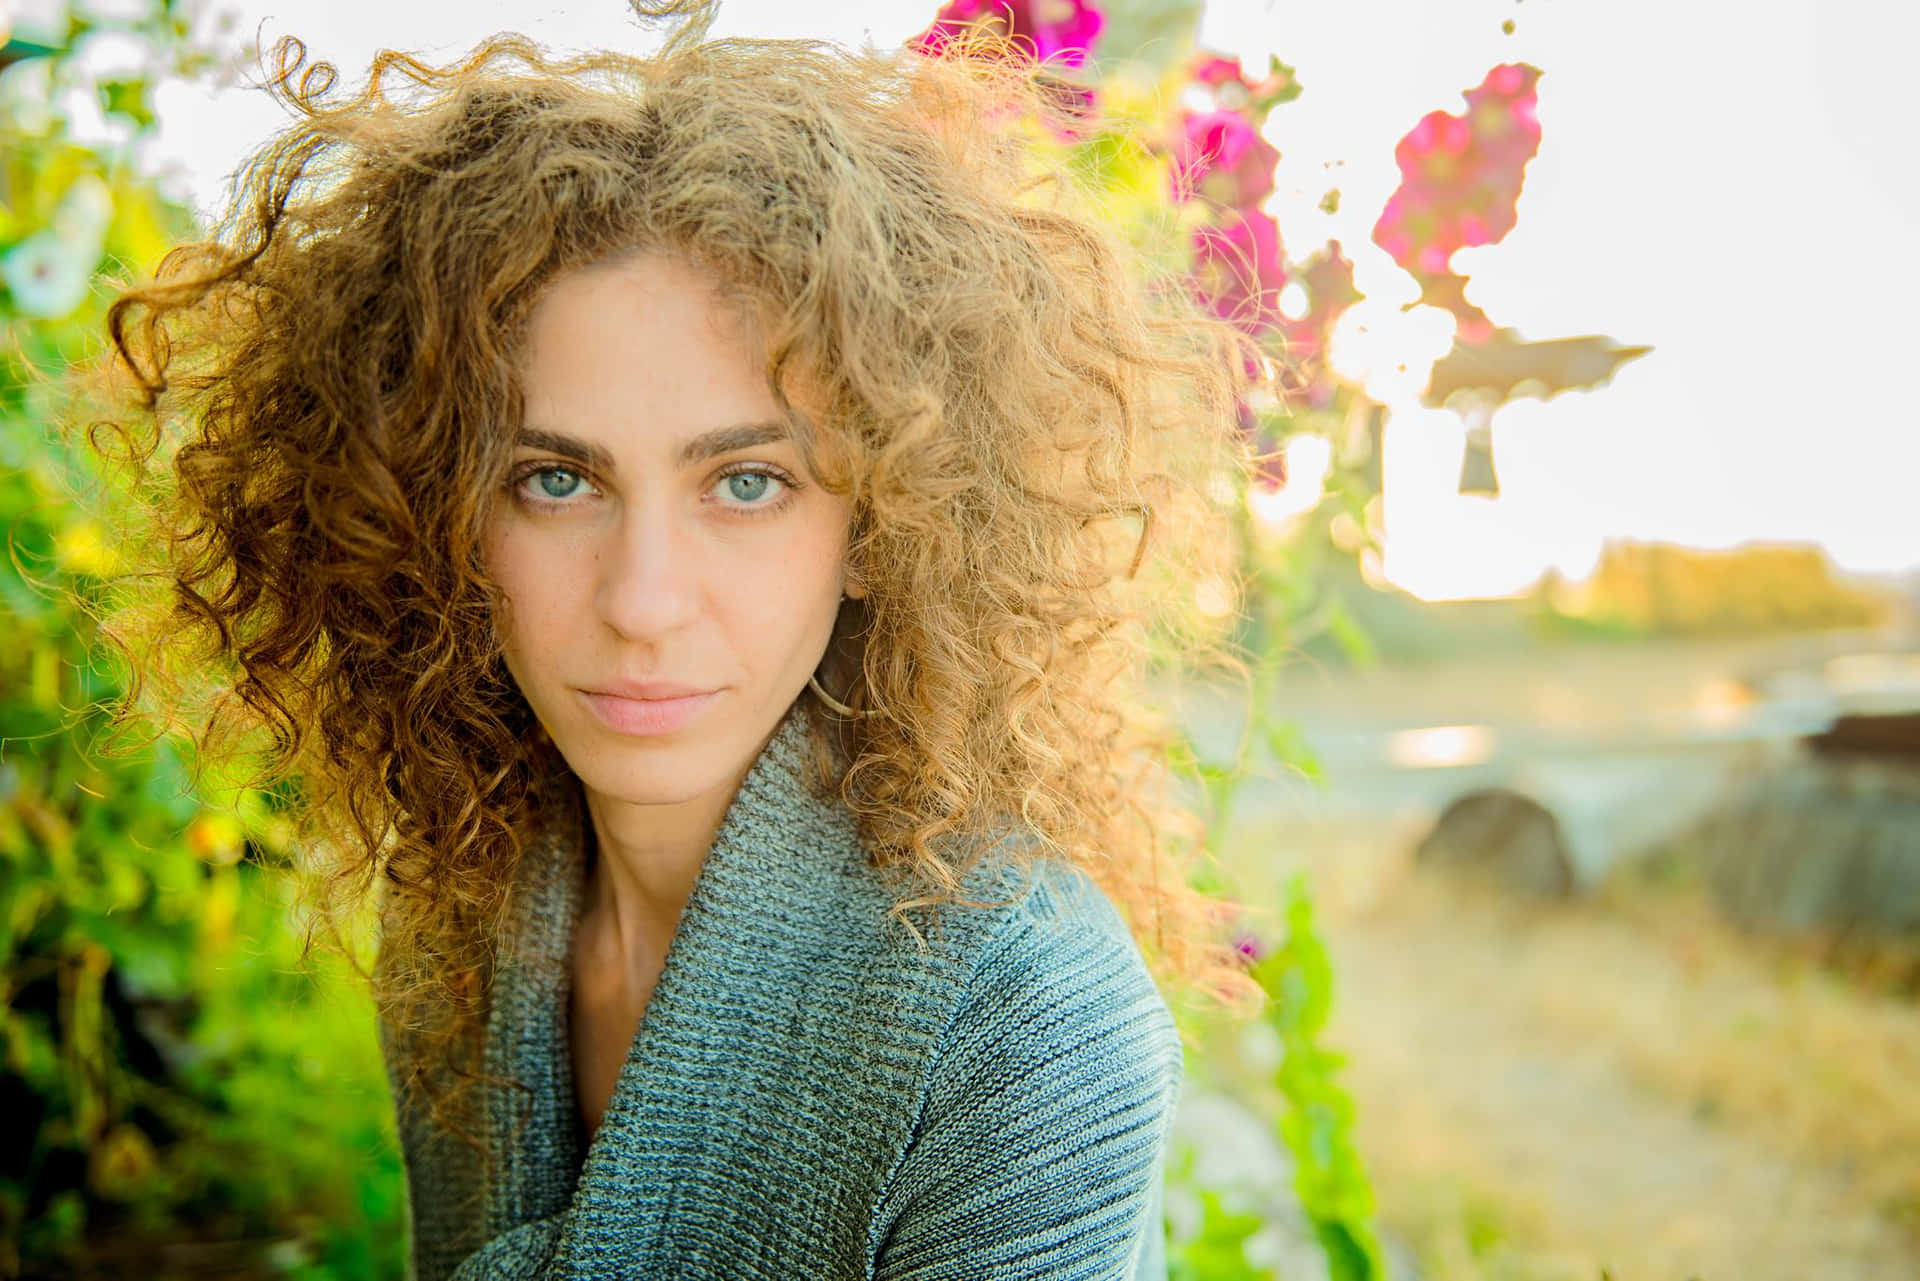 Curly Haired Woman Outdoor Portrait Wallpaper